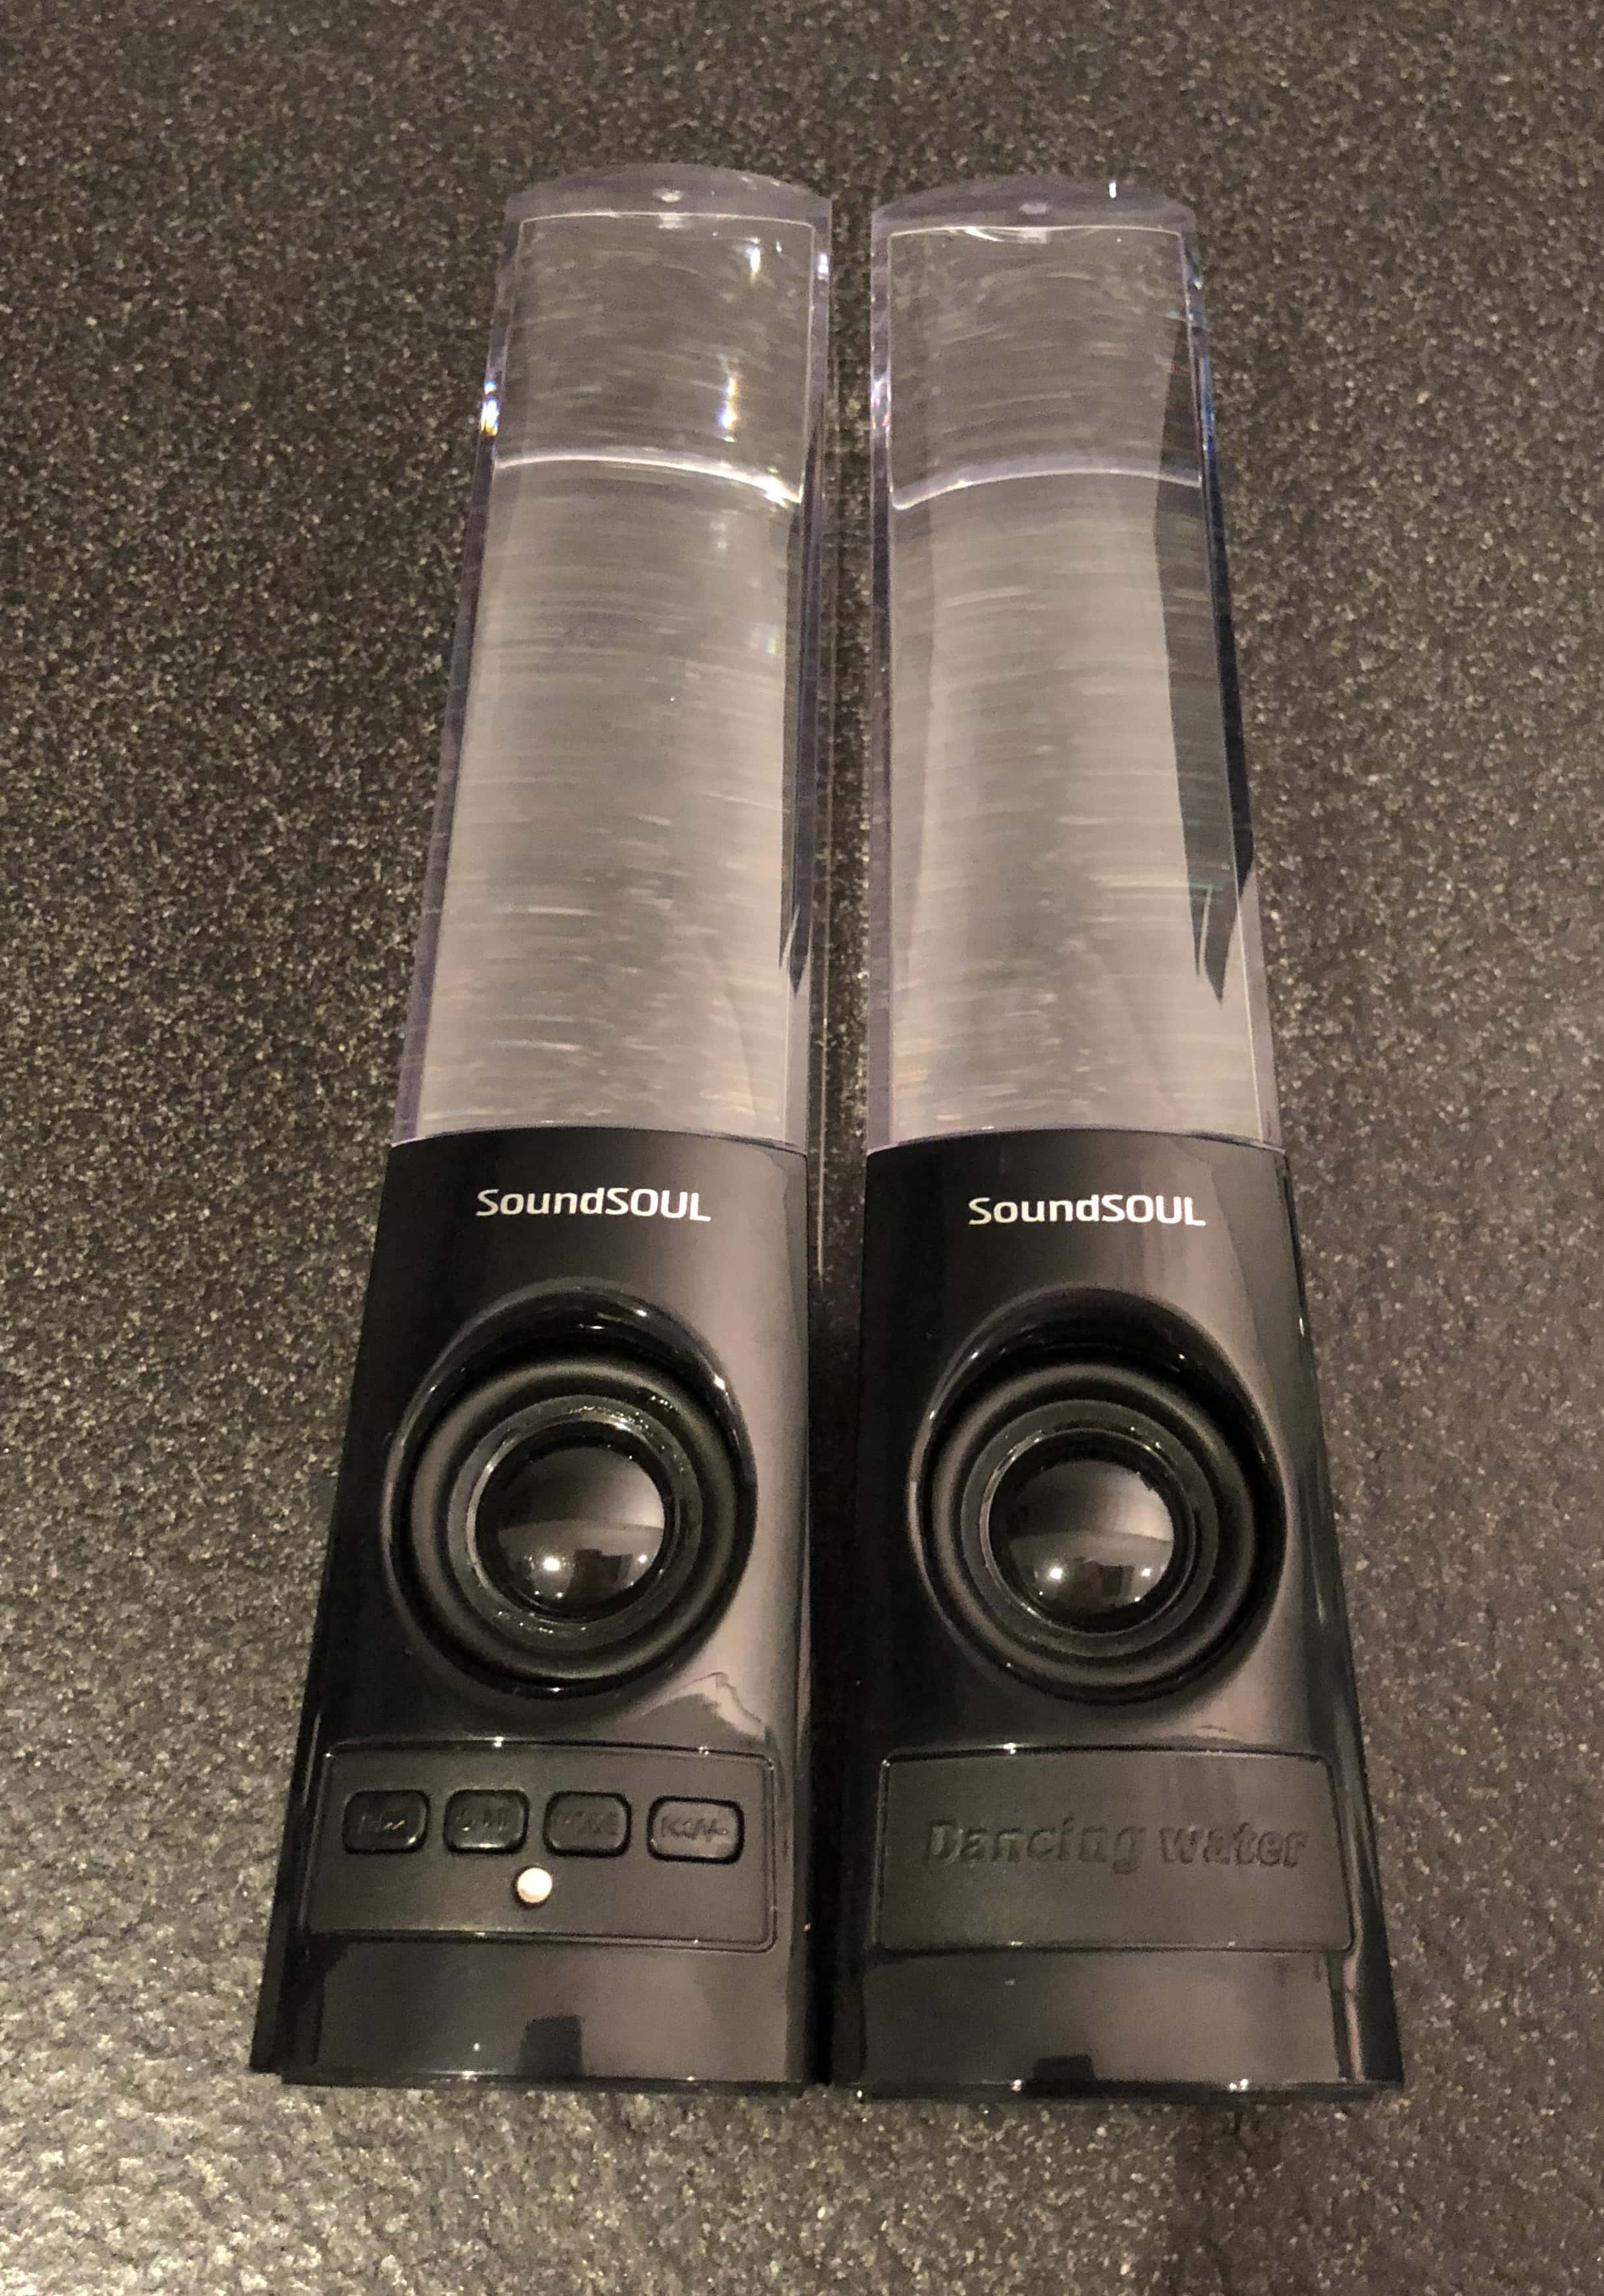 SoundSOUL Bluetooth Water Speakers review